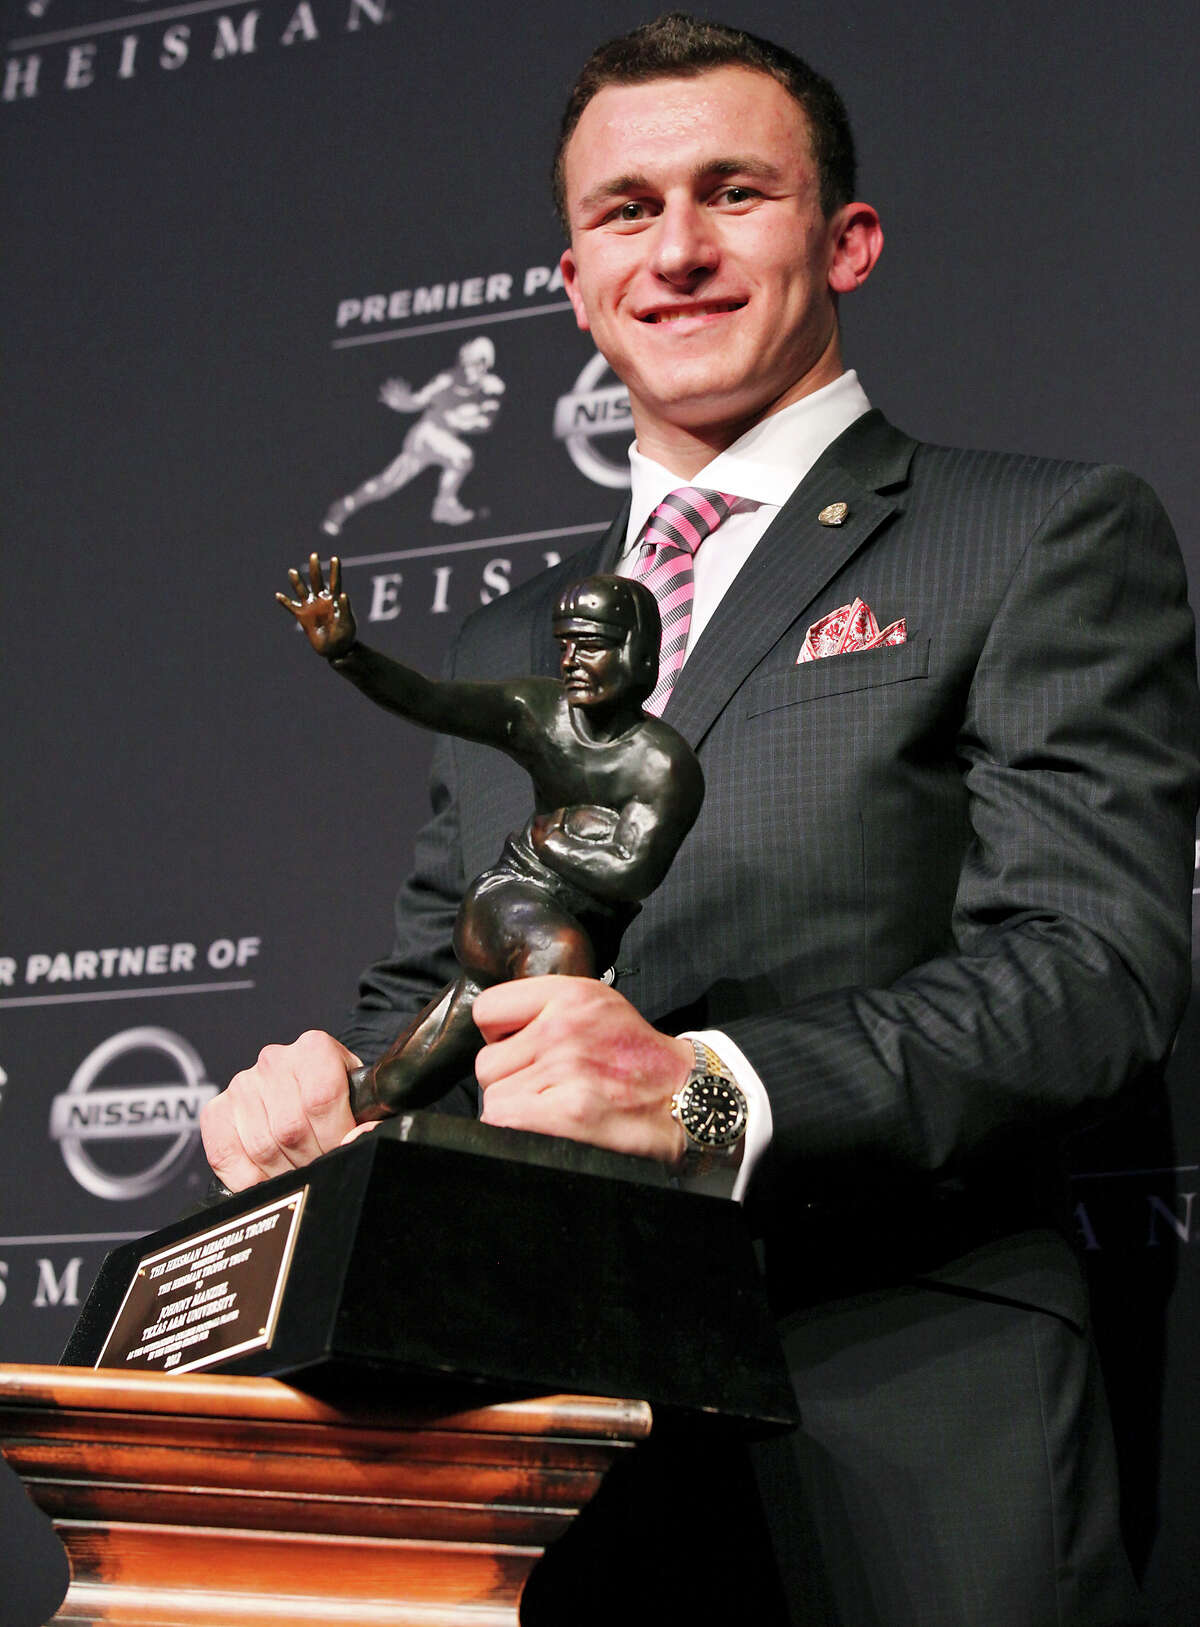 The celebrated “Johnny Football” became the first freshman to win the Heisman Trophy as the nation's best college football player. After sitting out a year at A&M, he led the Aggies as a redshirt freshman to a 10-2 record in their first season in the Southeastern Conference. Manziel also won the Davey O'Brien Award as the nation's top quarterback and the Associated Press Player of the Year after setting an SEC record with 4,600 yards of total offense.